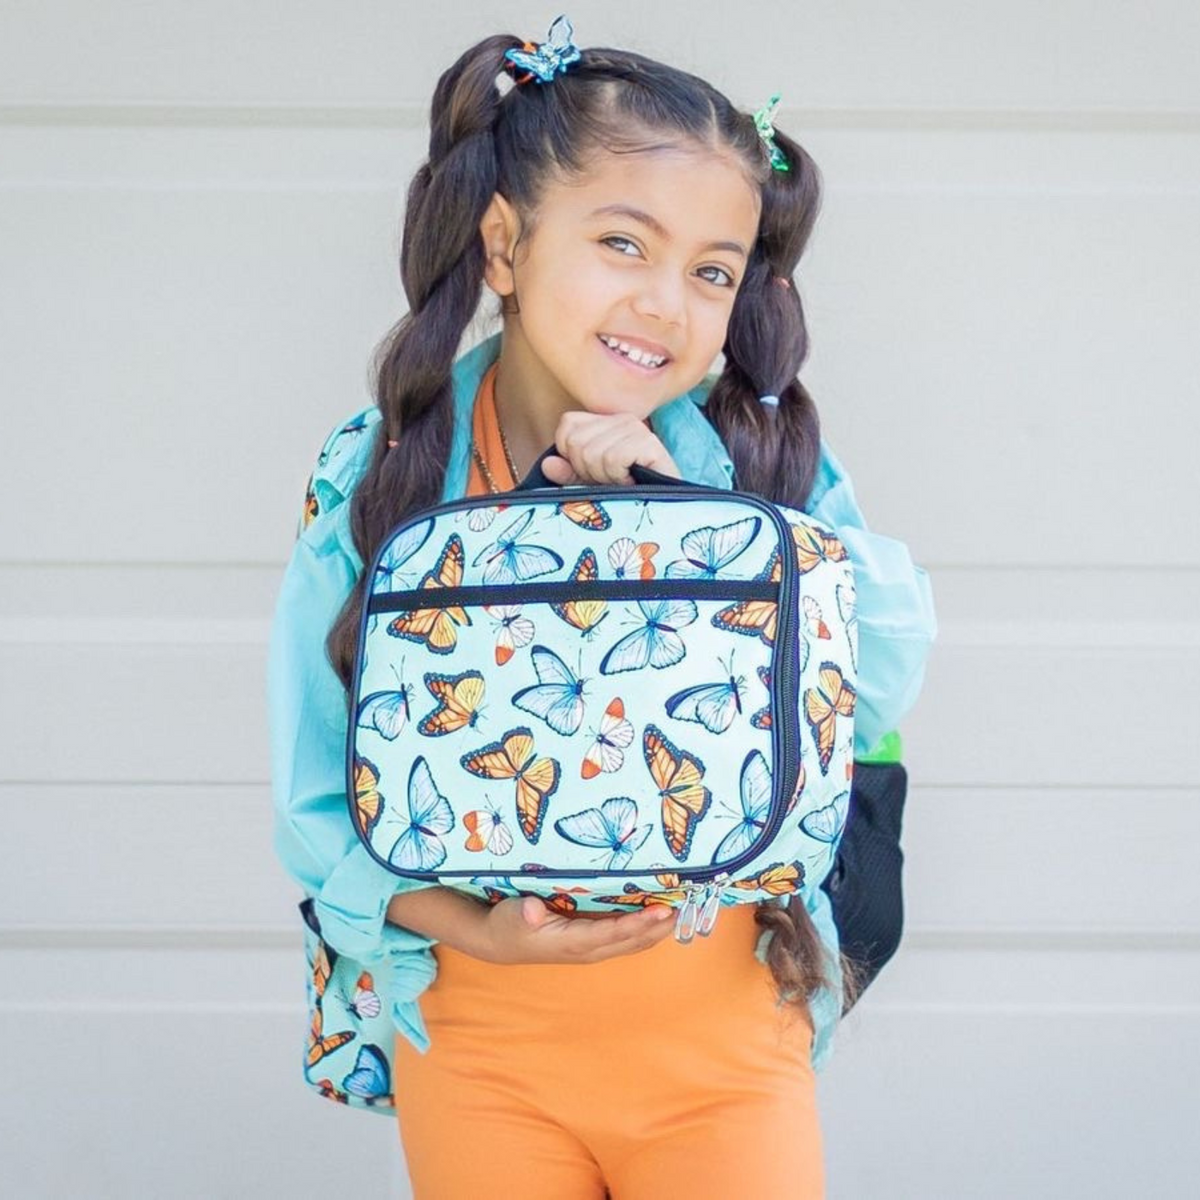 Green Pixel Kids Lunch Box - Soft-Sided, Insulated, Gives Back to A Great Cause